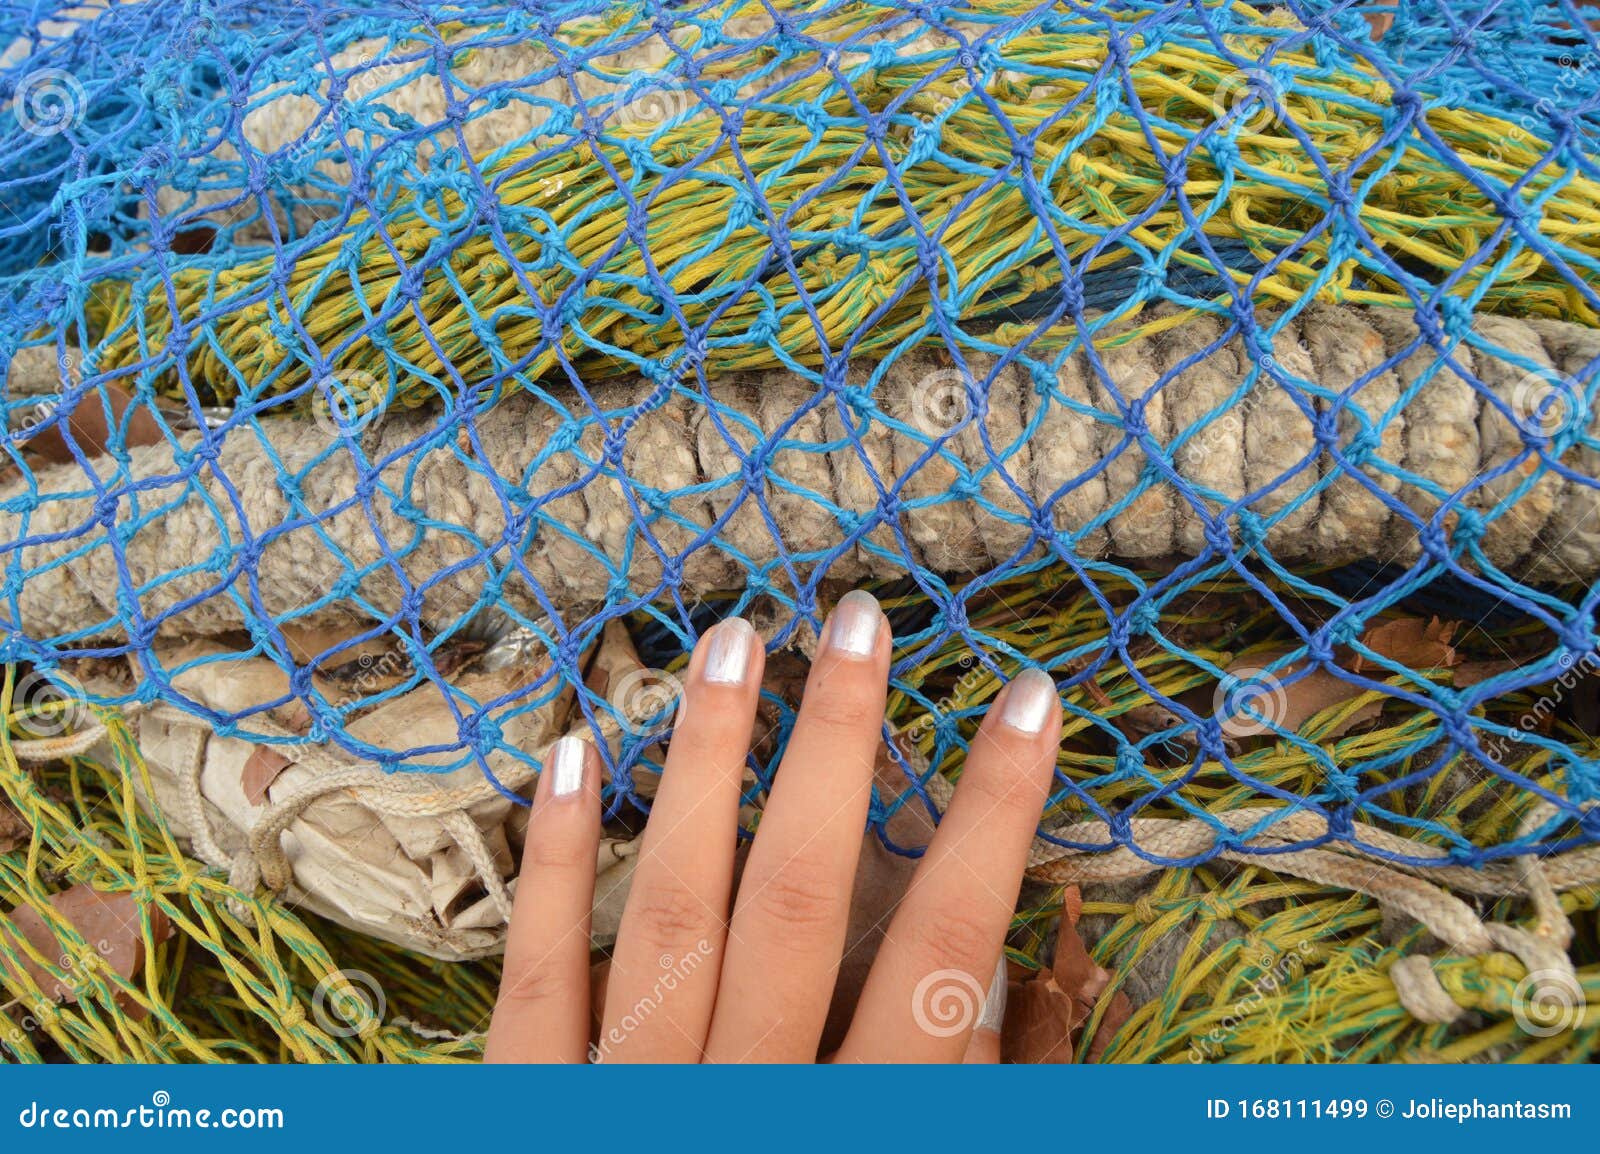 https://thumbs.dreamstime.com/z/teen-girl-s-hand-touching-colourful-fishing-nets-fishing-net-net-used-fishing-nets-devices-made-fibers-woven-168111499.jpg